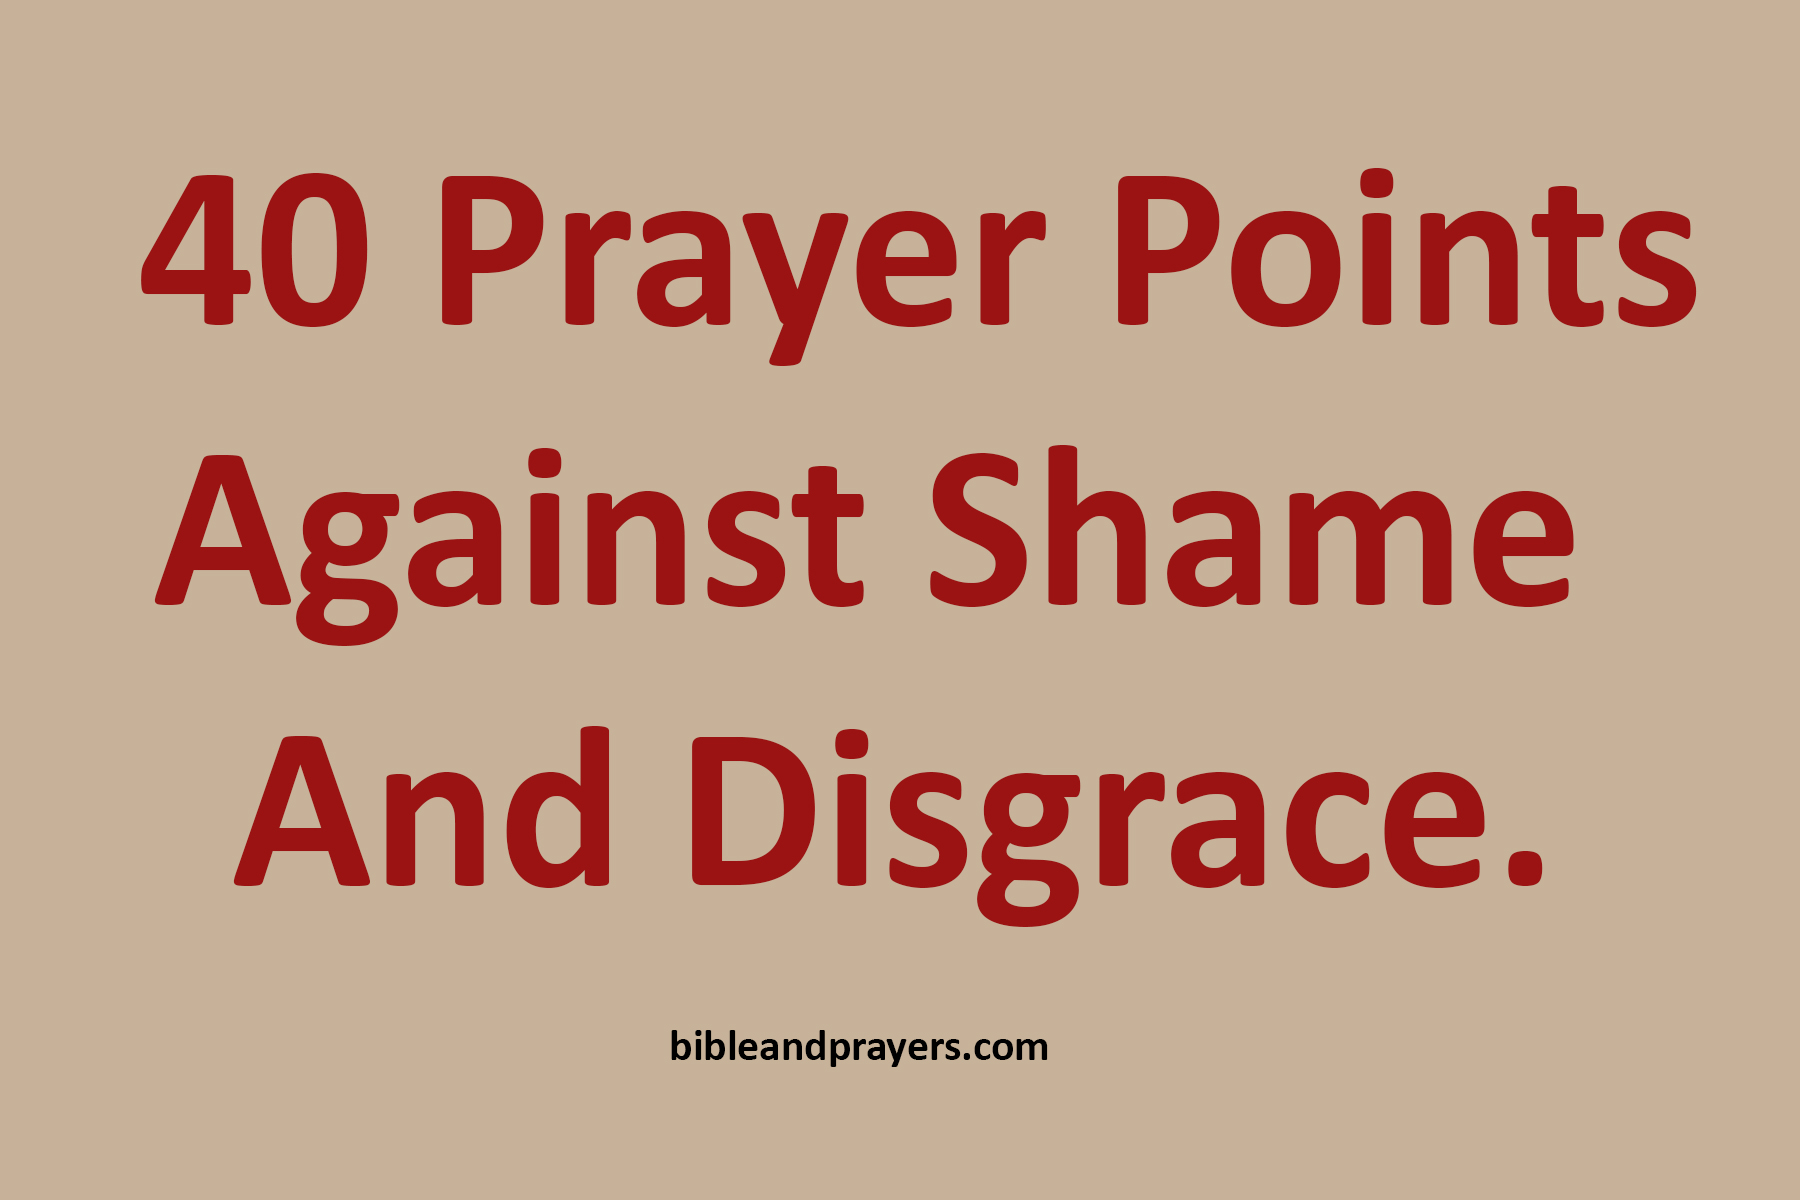 40 Prayer Points Against Shame And Disgrace